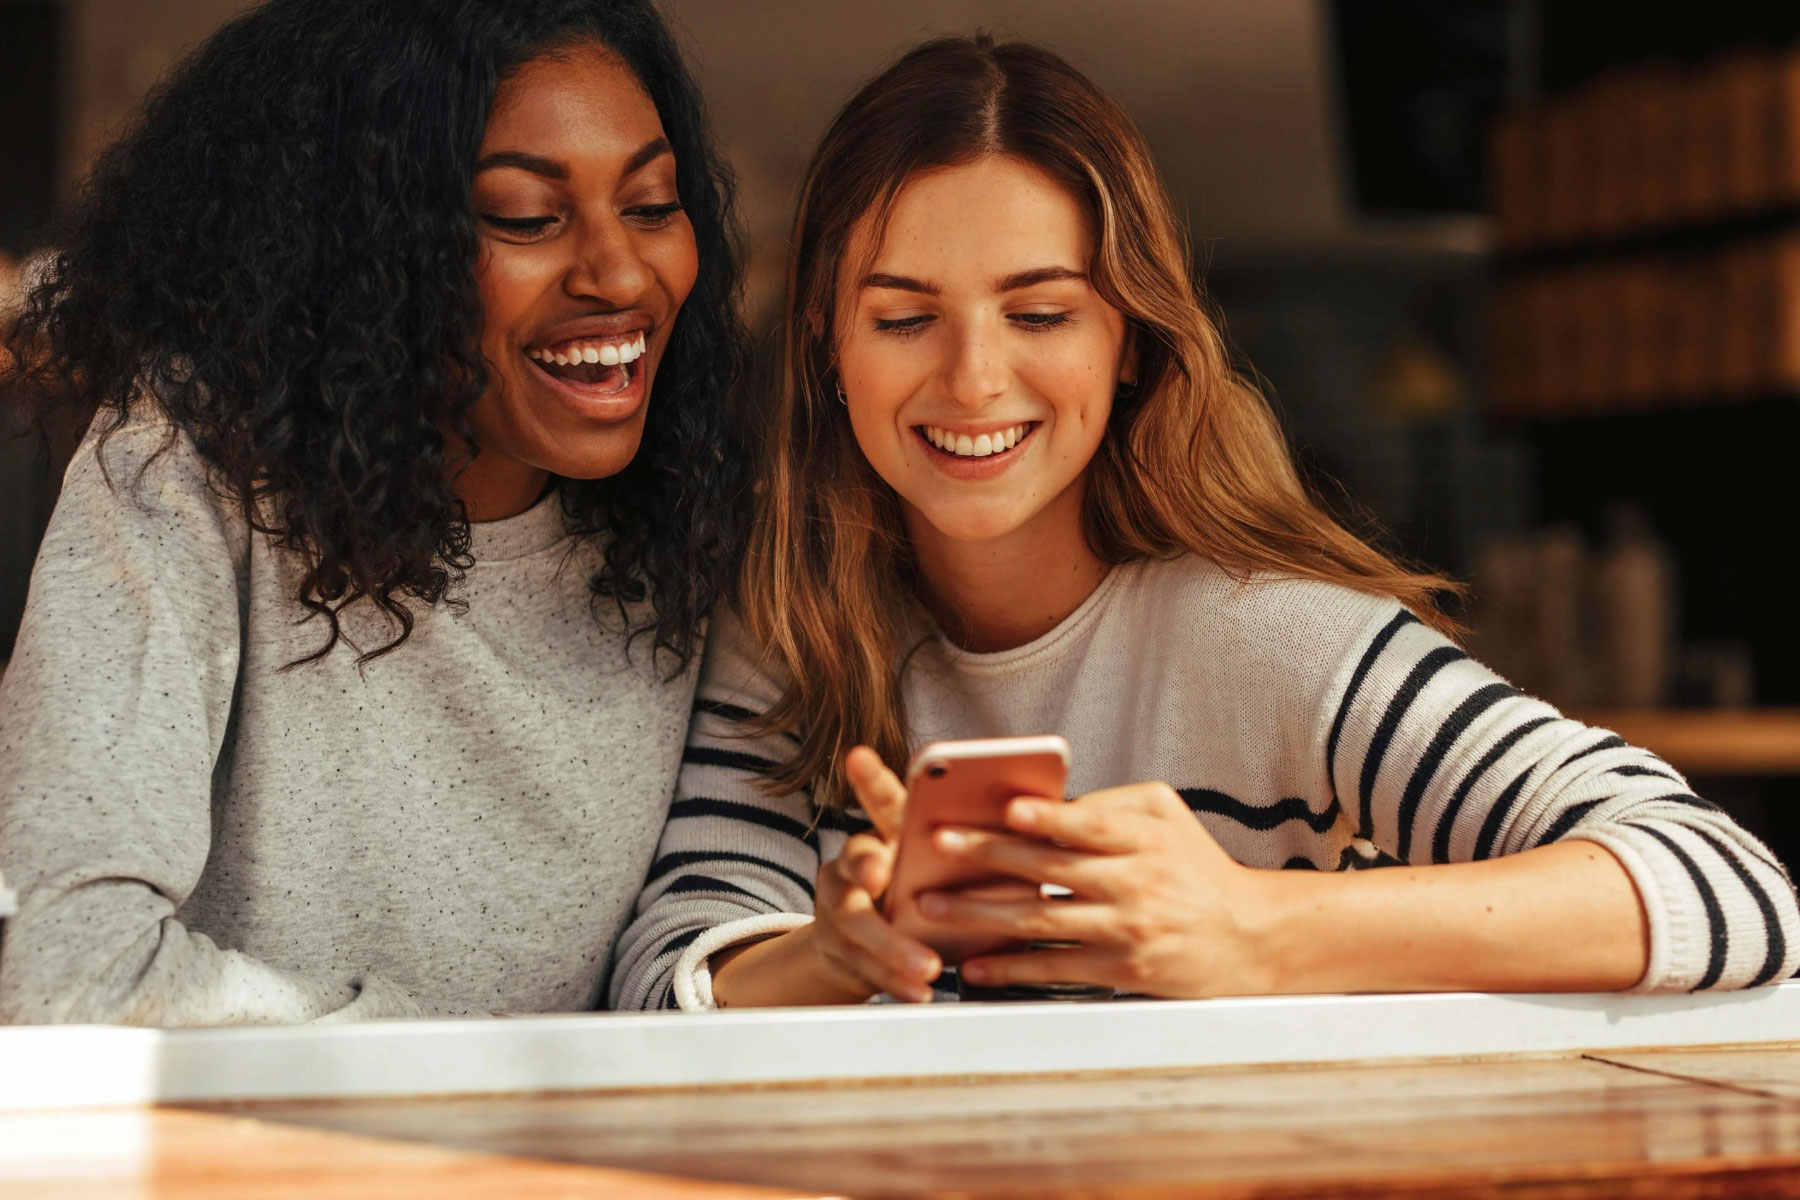 Two female college students looking at one smartphone together while smiling